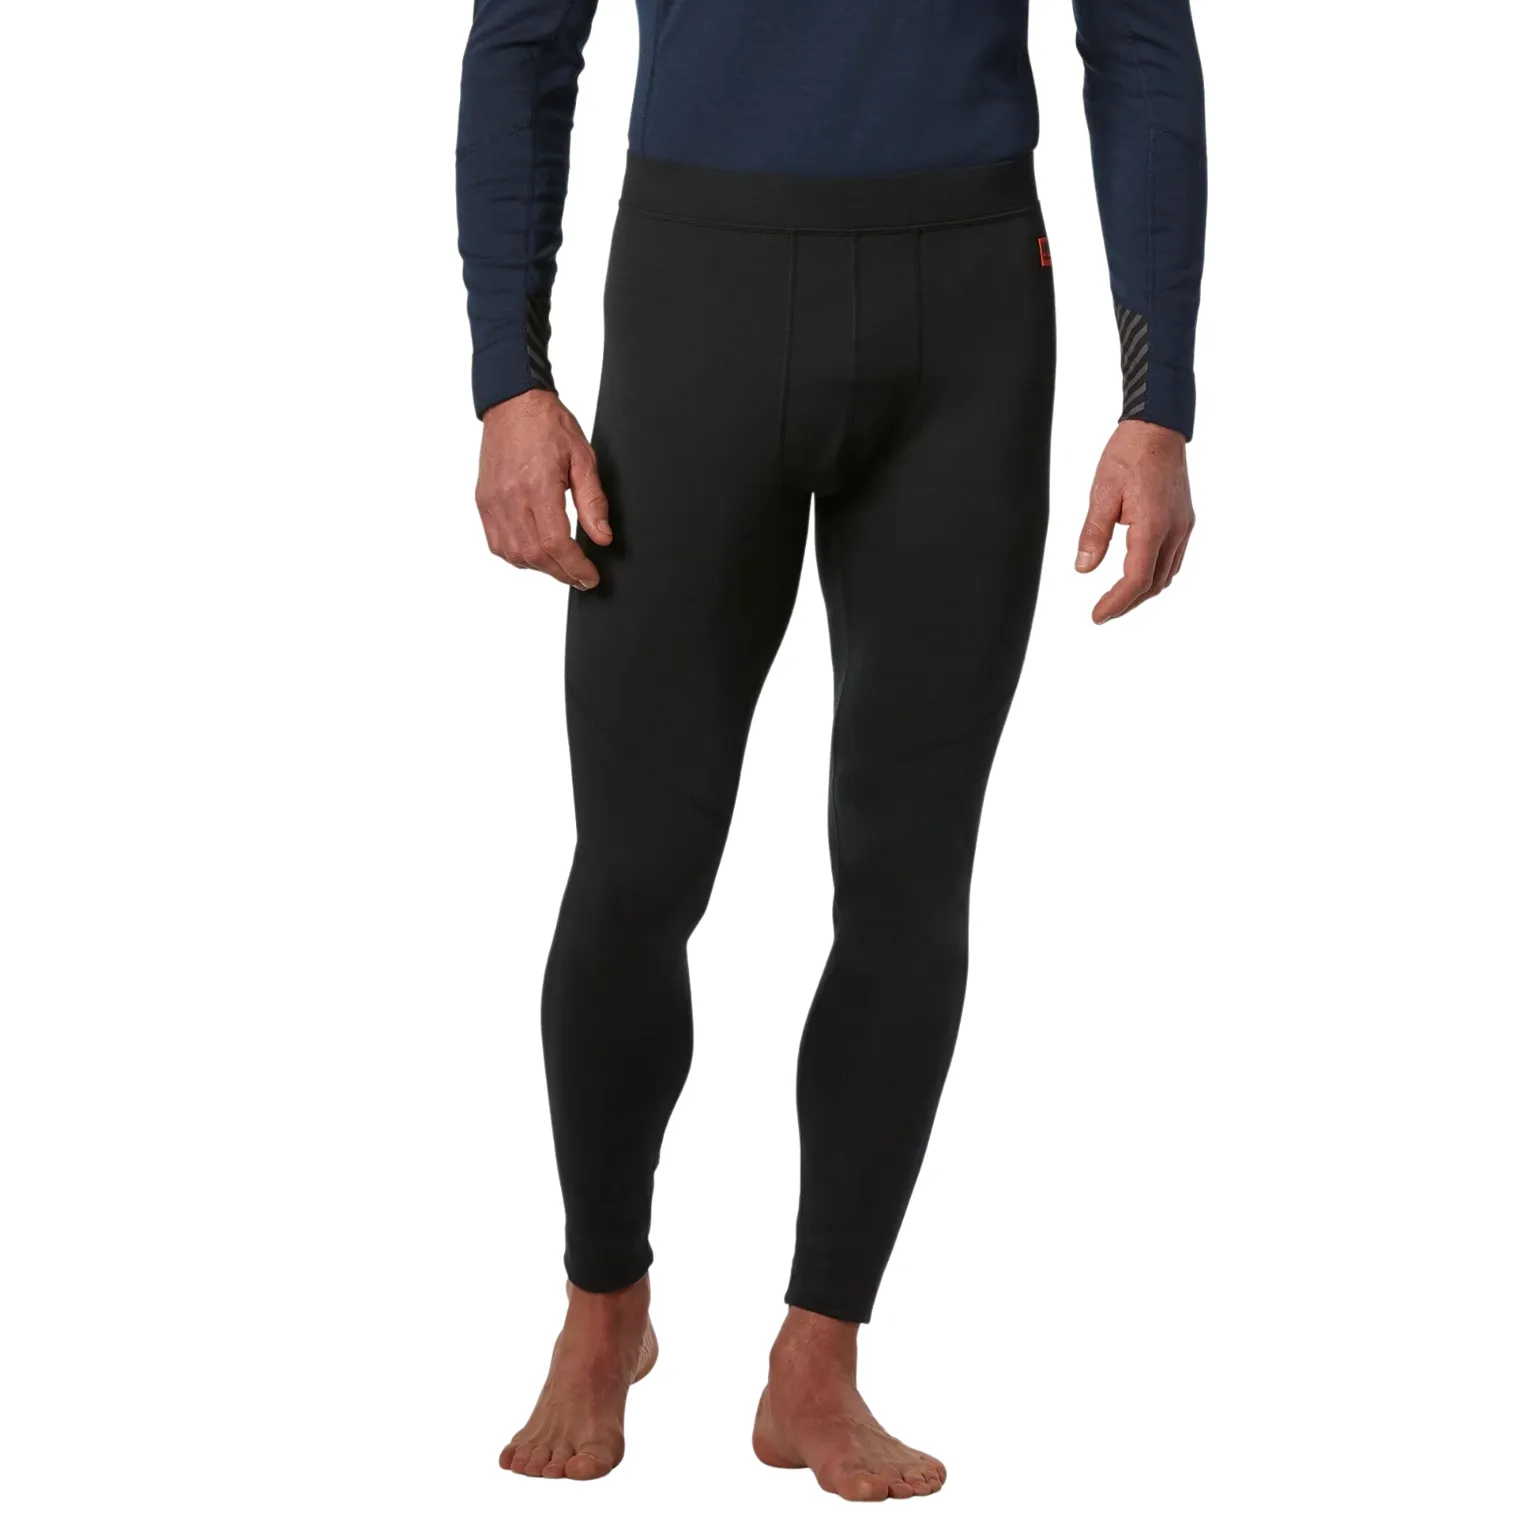 Men’s Long Johns manufacturing with trendy design